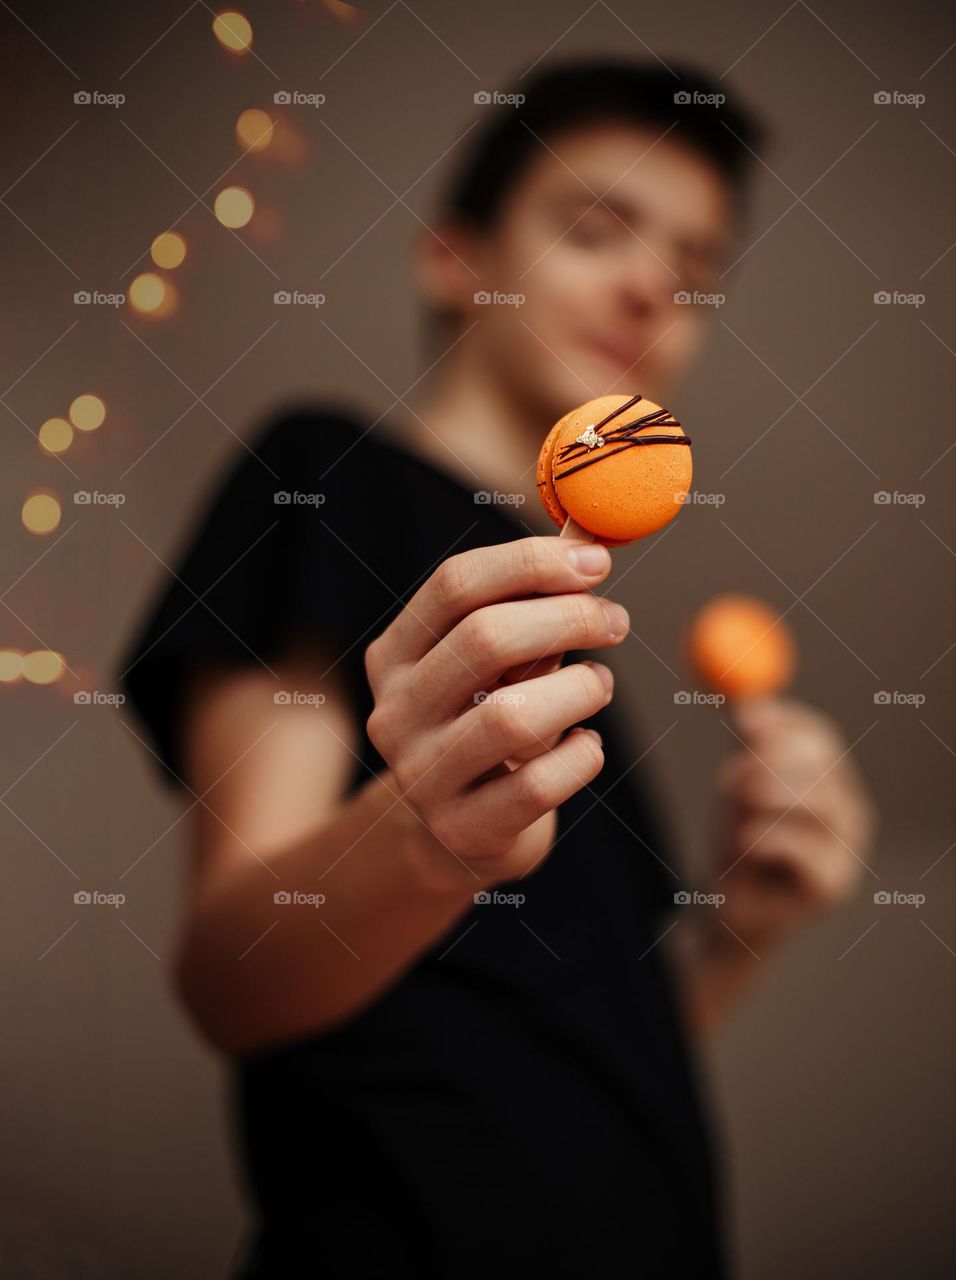 Selective focus to orange macarons in hand of person blurred in background.